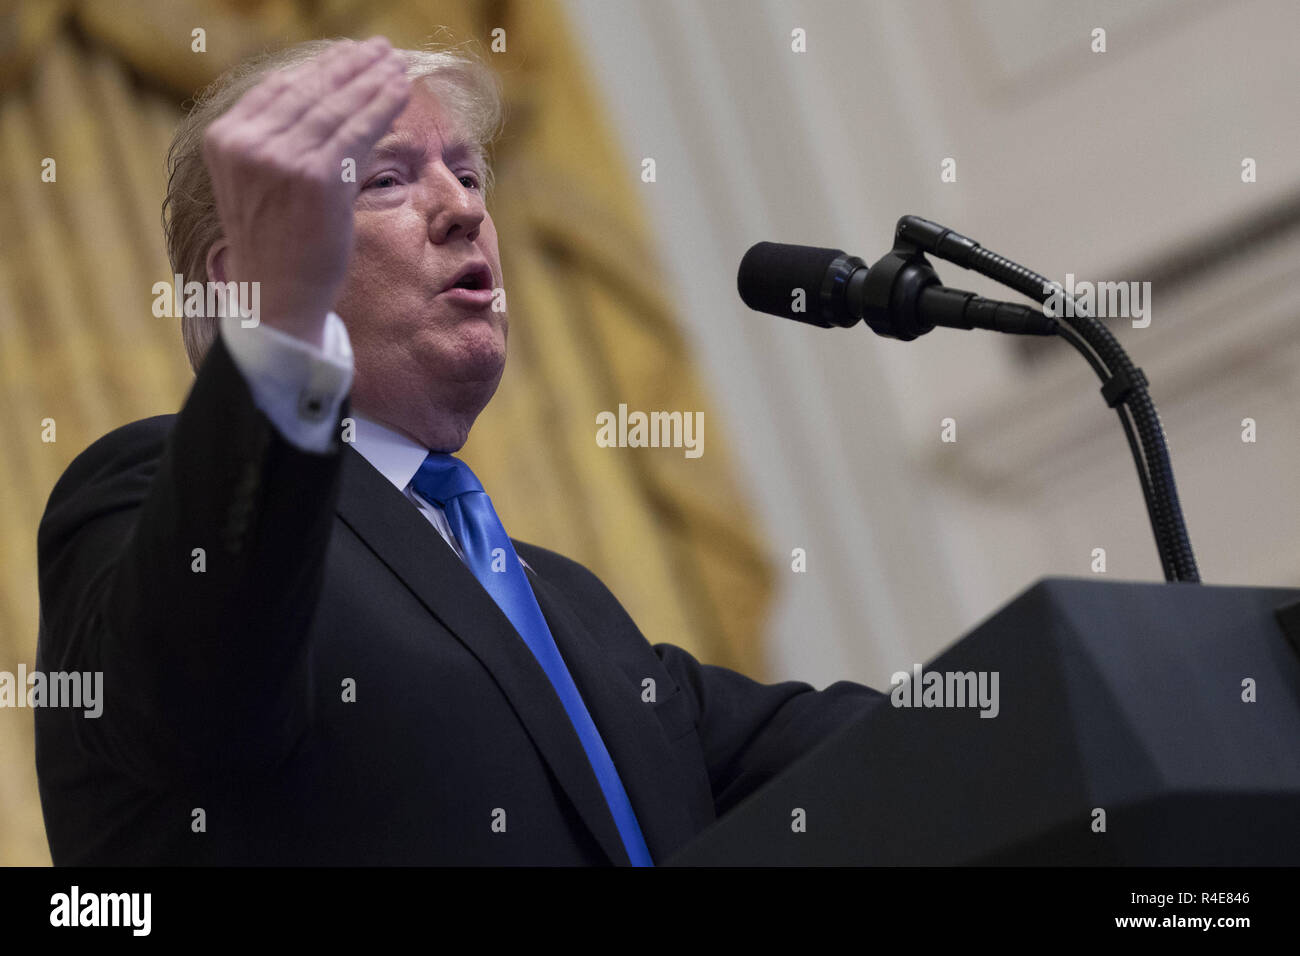 District of Columbia, USA. 26th Oct, 2018. US President Donald Trump speaks to White House guests during the Young Black Leadership Summit at the White House on October 26, 2018 in Washington, DC. Credit: Alex Edelman/ZUMA Wire/Alamy Live News Stock Photo